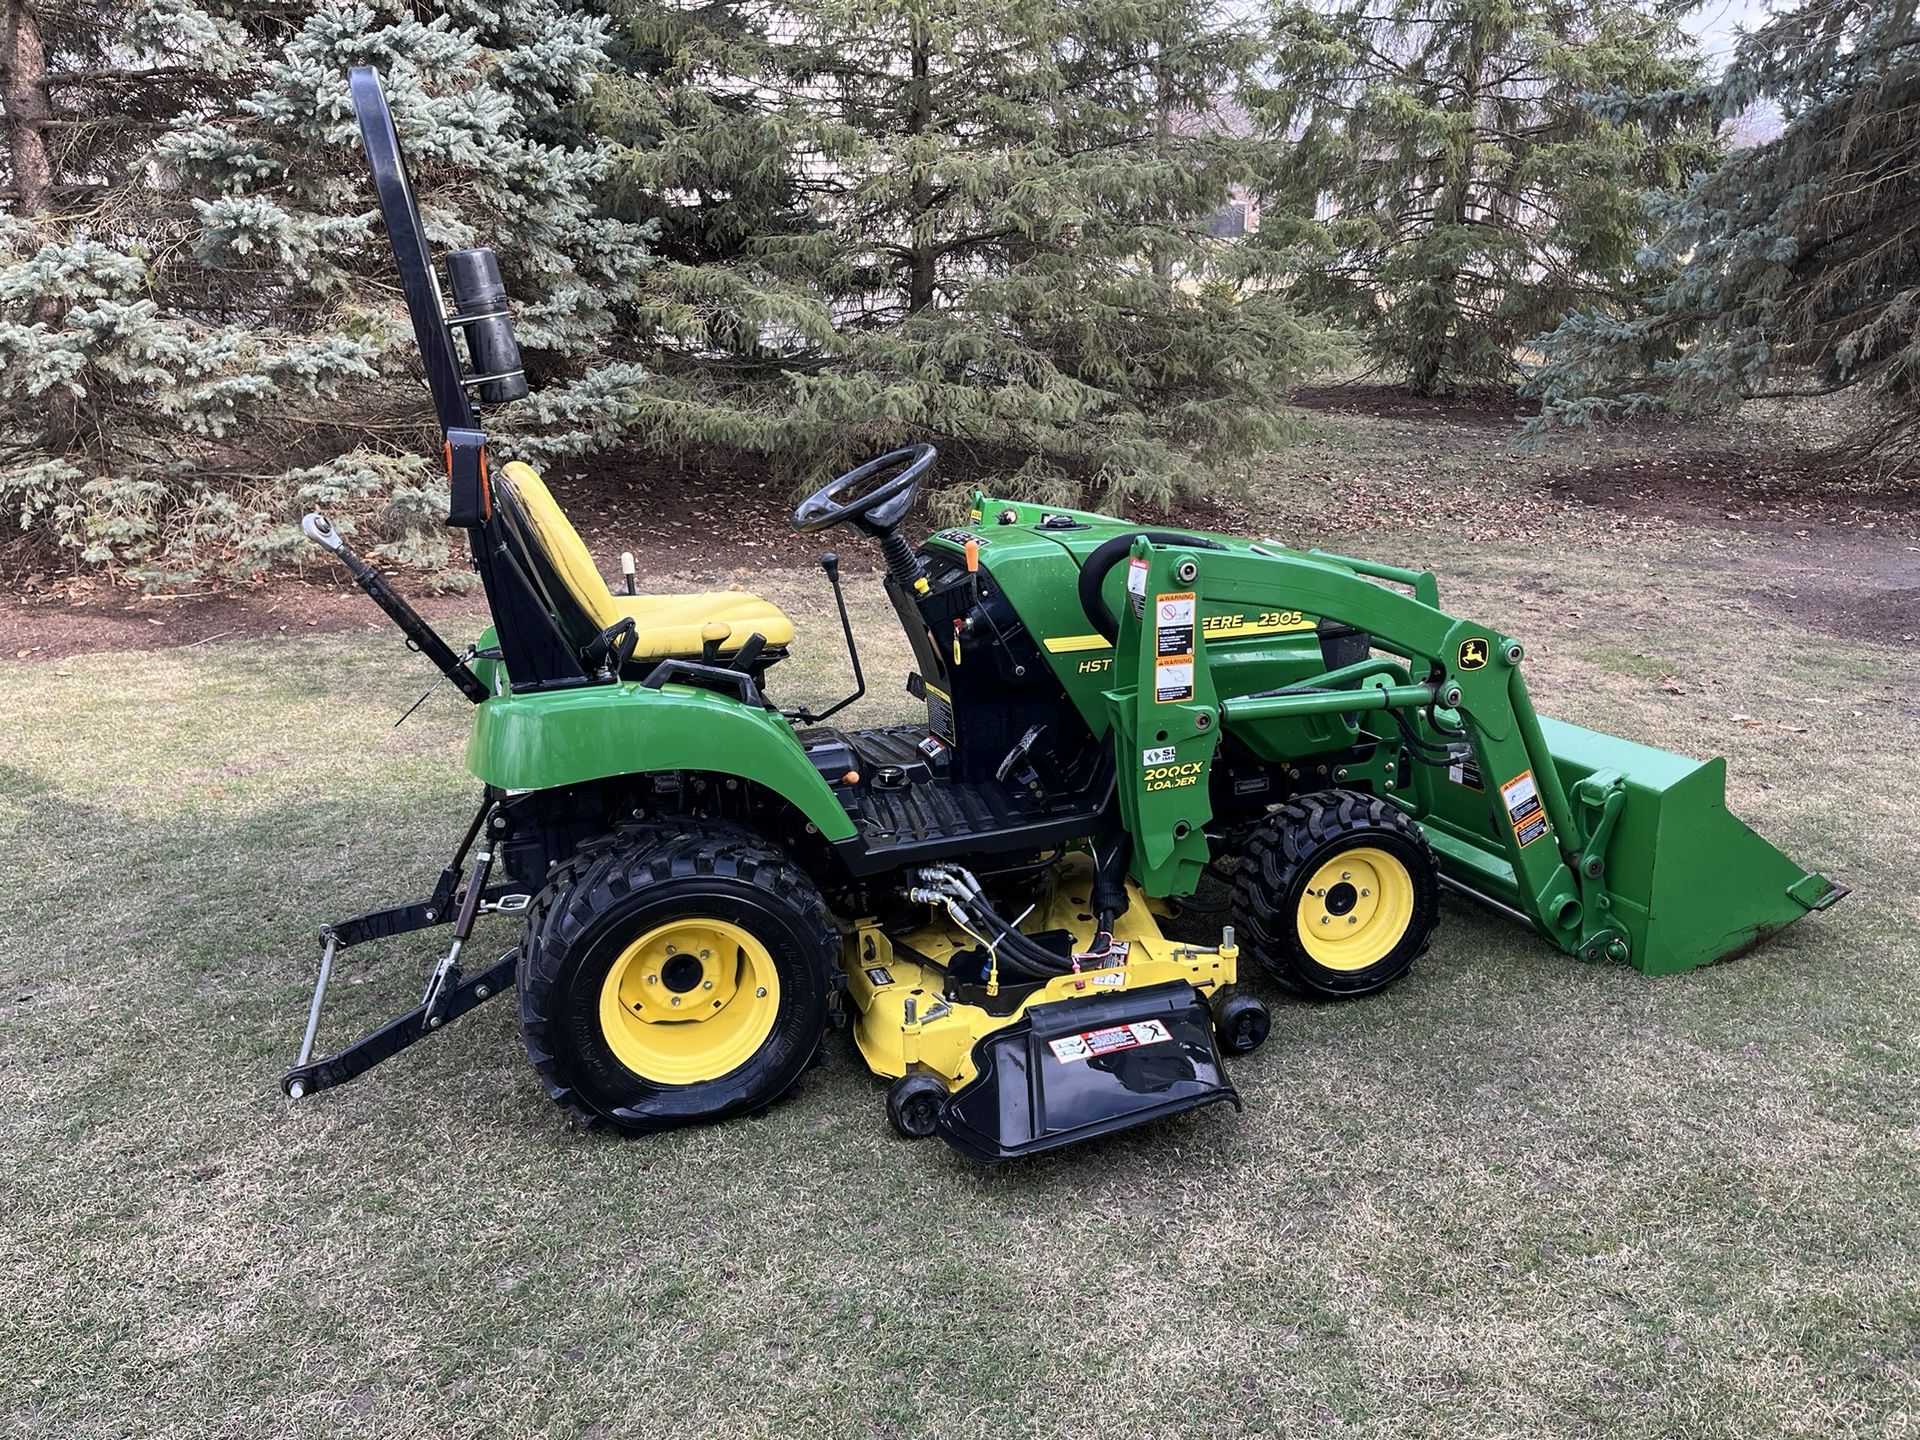 John Deere 2305 Four Wheel Drive Compact Tractor With A Loader And 62 Inch Lawn Mower Deck